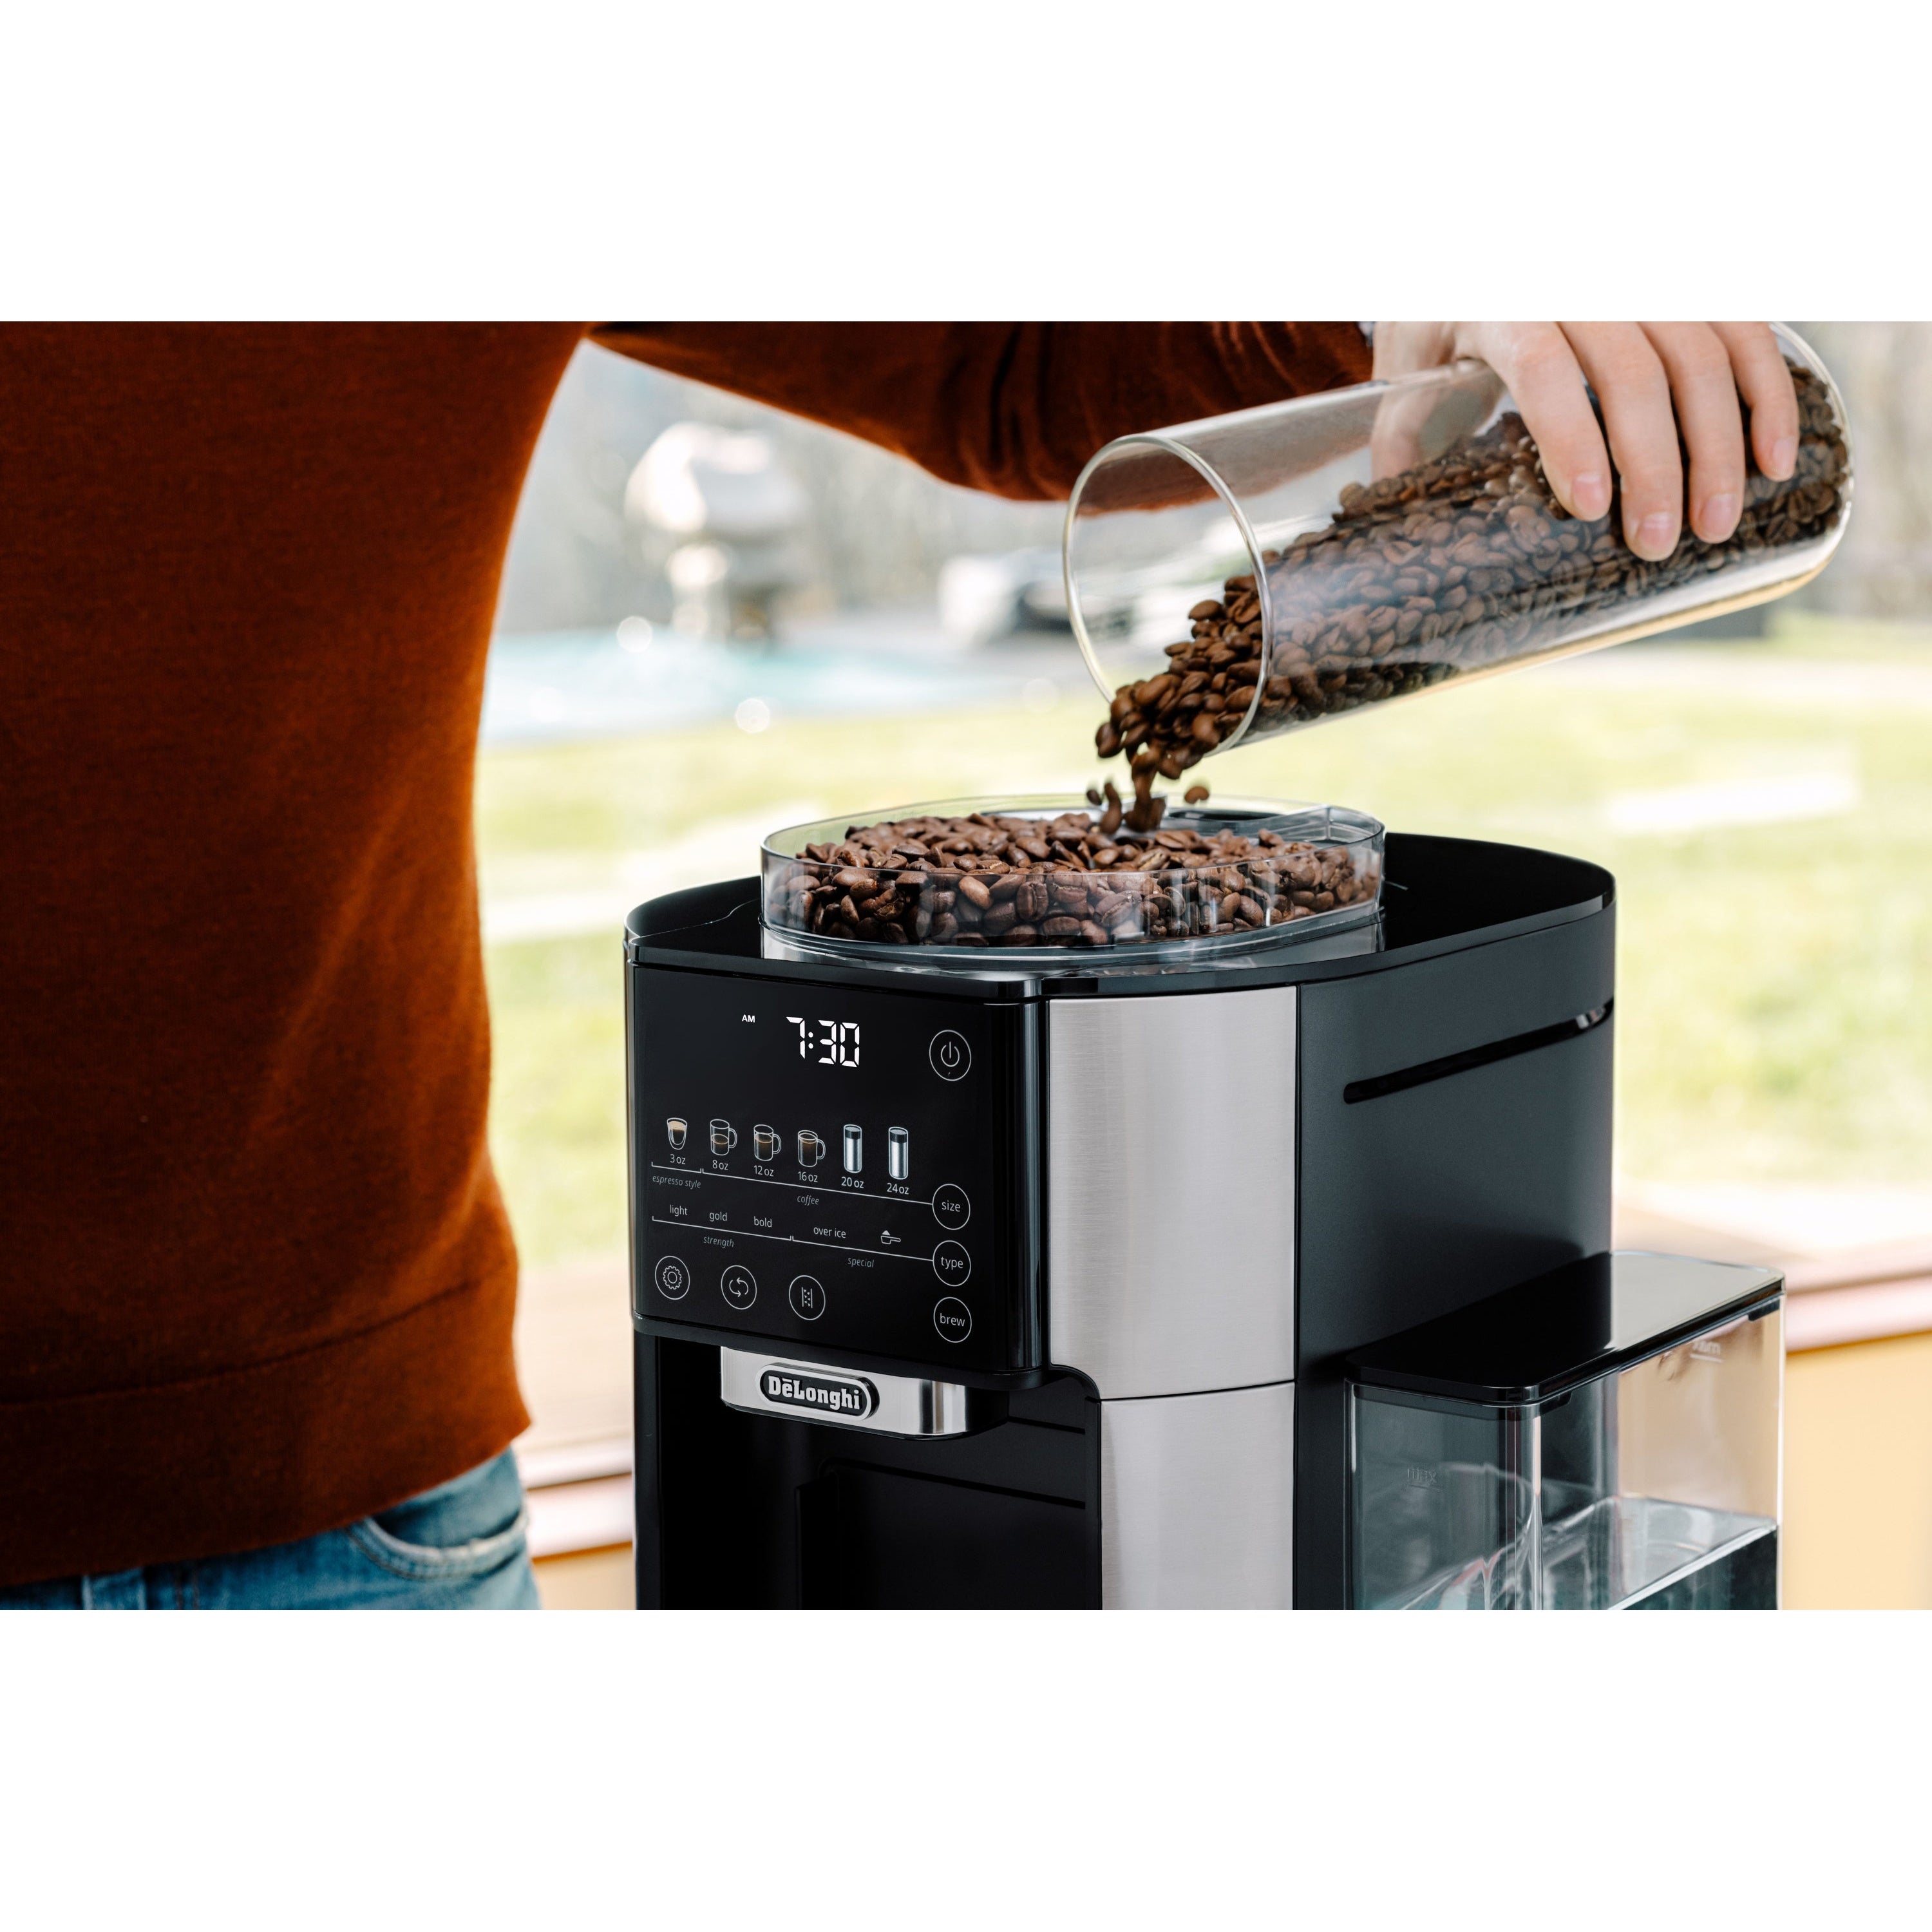 DeLonghi TrueBrew Automatic Coffee Machine – Stainless CAM51025MB Grinder 